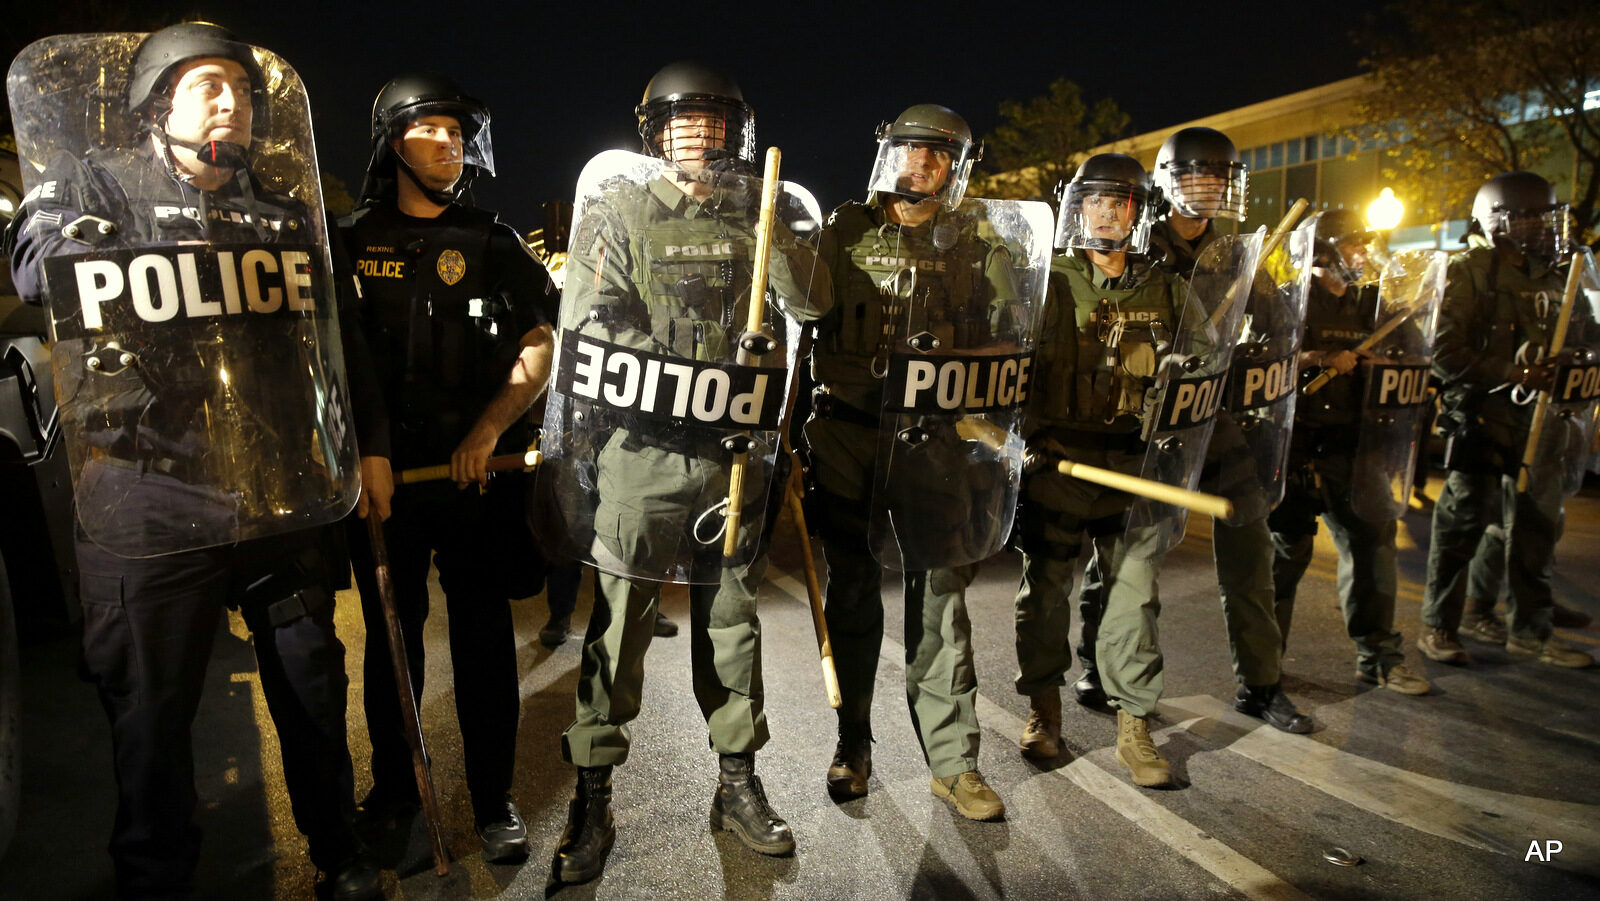 Police stand in formation as a curfew approaches in Baltimore. Baltimore police officers routinely discriminate against blacks, repeatedly use excessive force and are not adequately held accountable for misconduct, according to a harshly critical Justice Department report being presented Wednesday, Aug. 10, 2016.